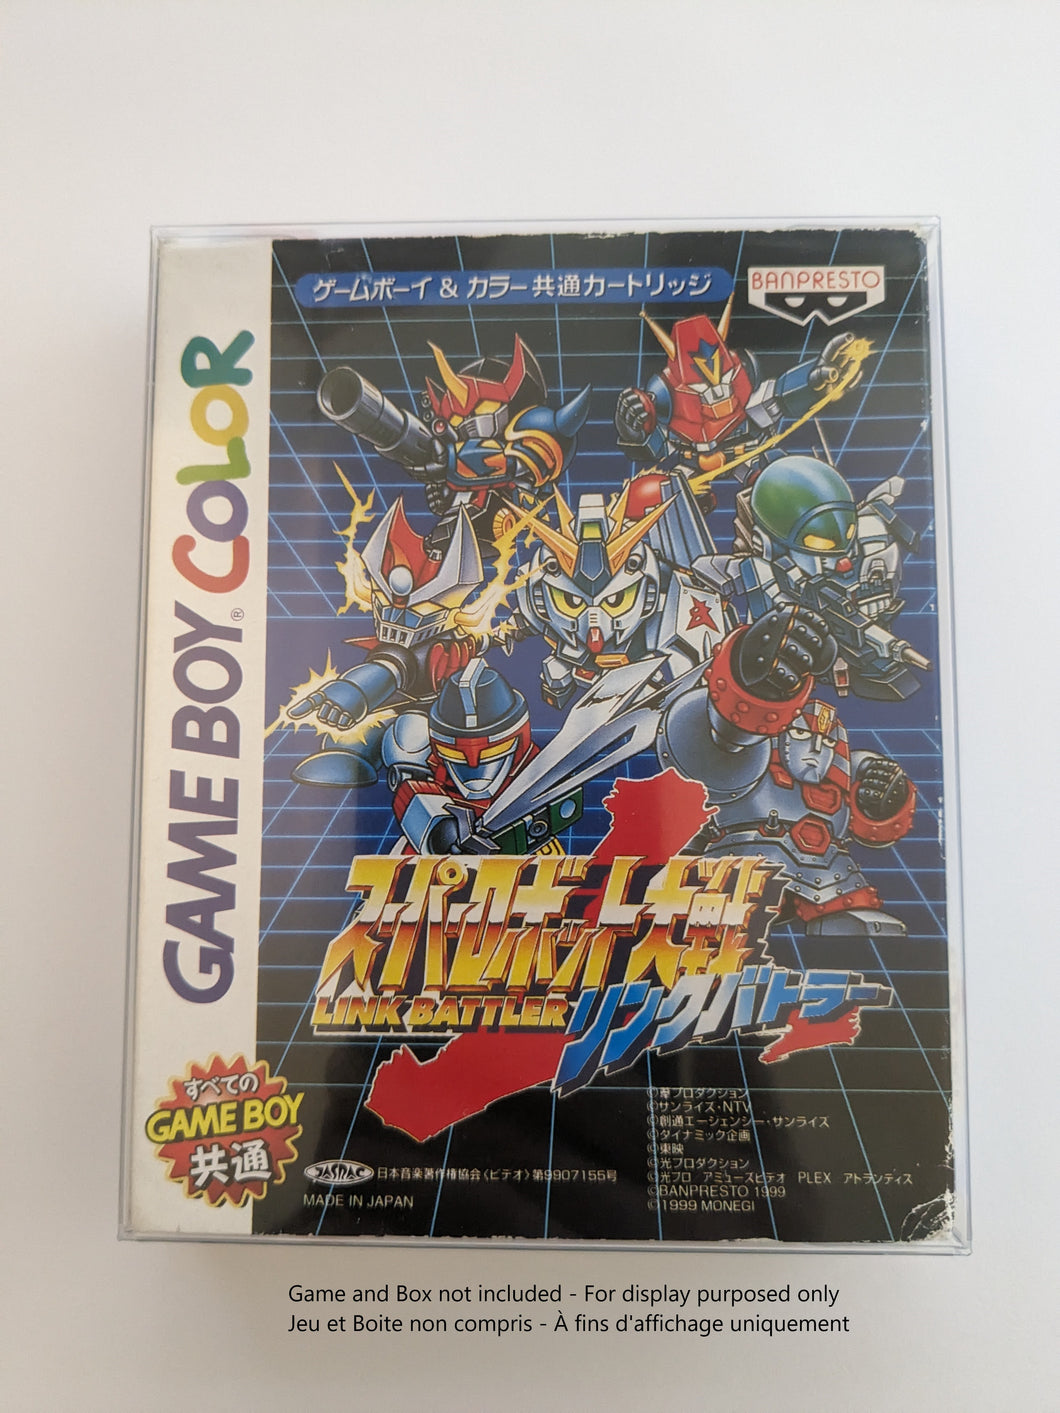 BOX PROTECTOR FOR NINTENDO GAMEBOY COLOR GBC JAP CIB GAME CLEAR PLASTIC CASE